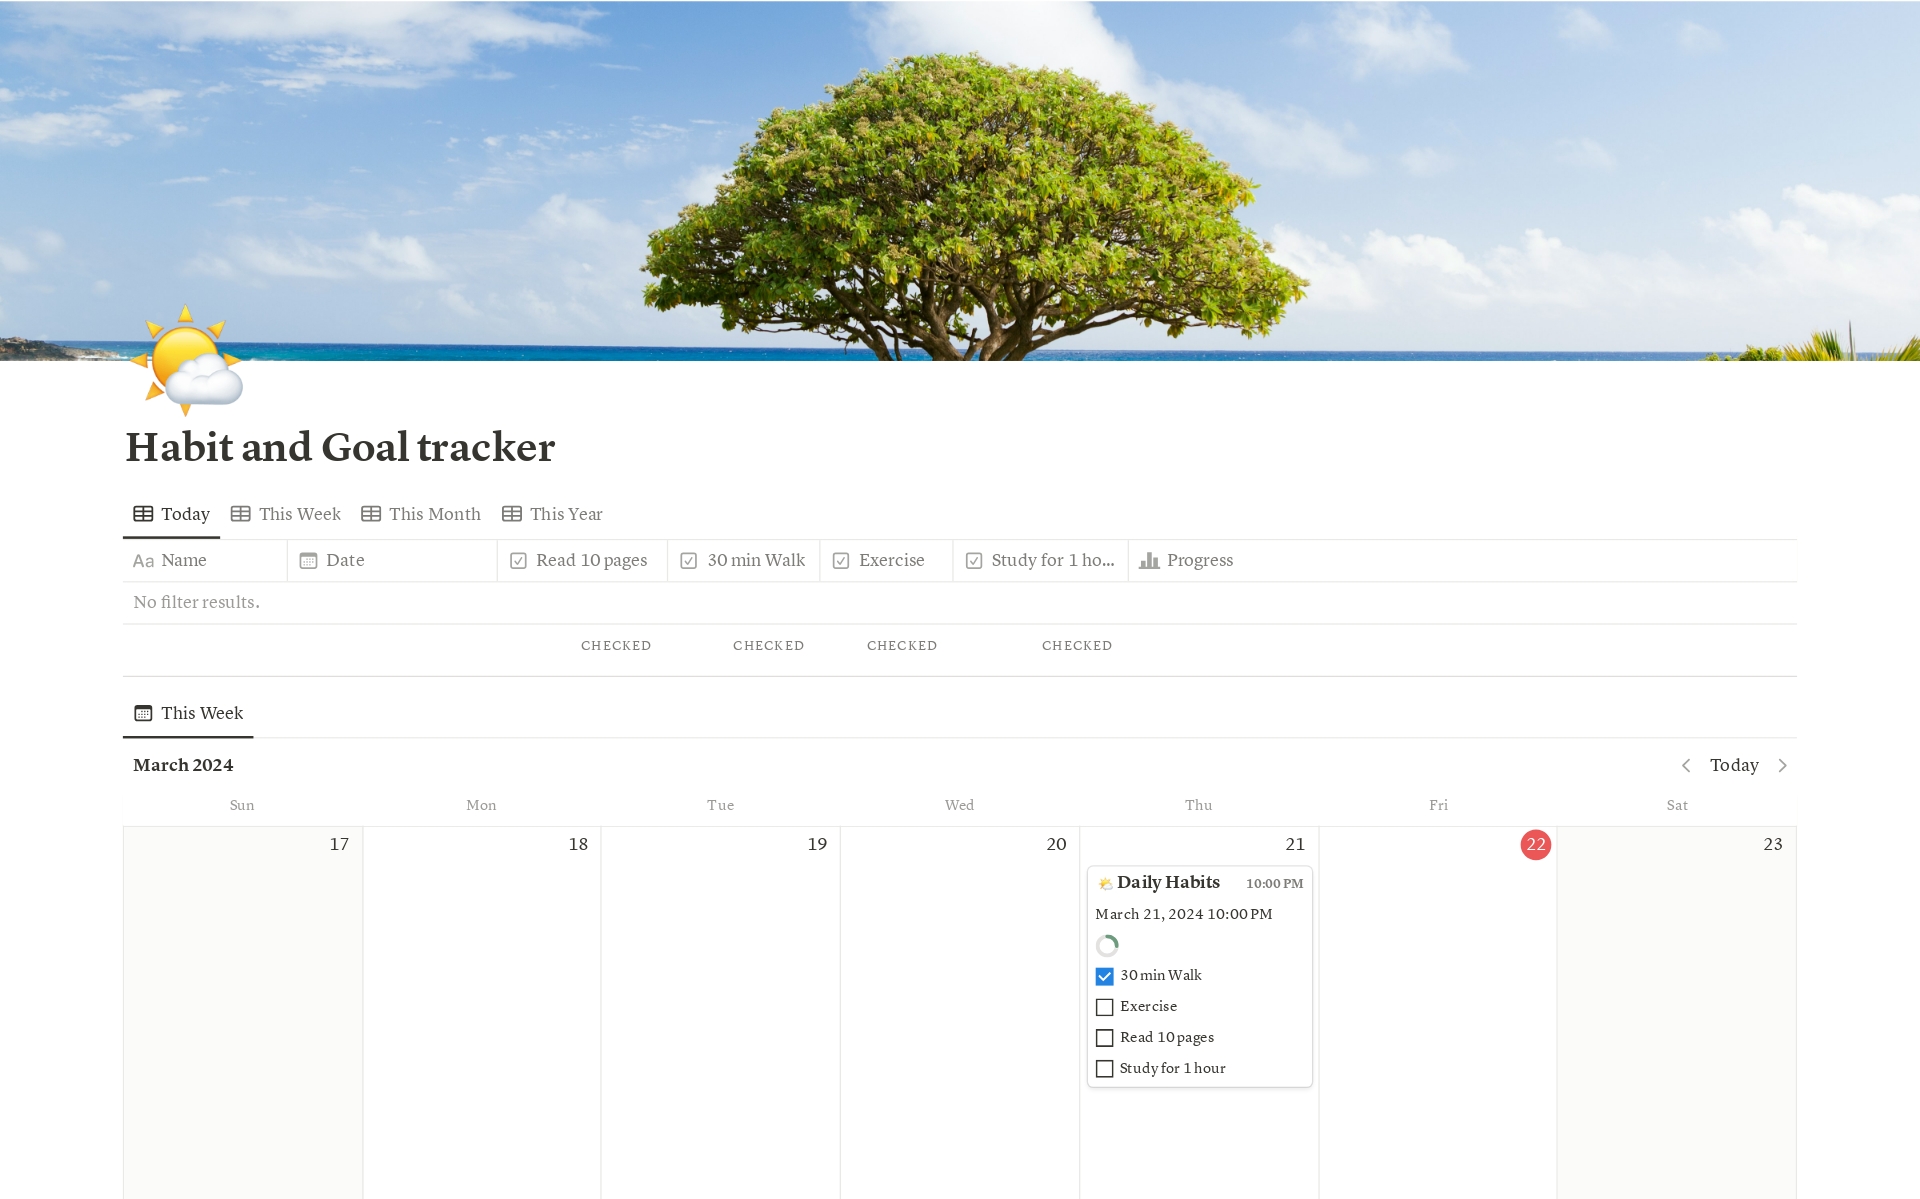 Introducing our Notion template designed to help you track habits and plan tasks for goal achievement. With customizable sections, it empowers you to optimize your time and productivity efficiently. The "Habit Tracking" section allows you to monitor daily habits